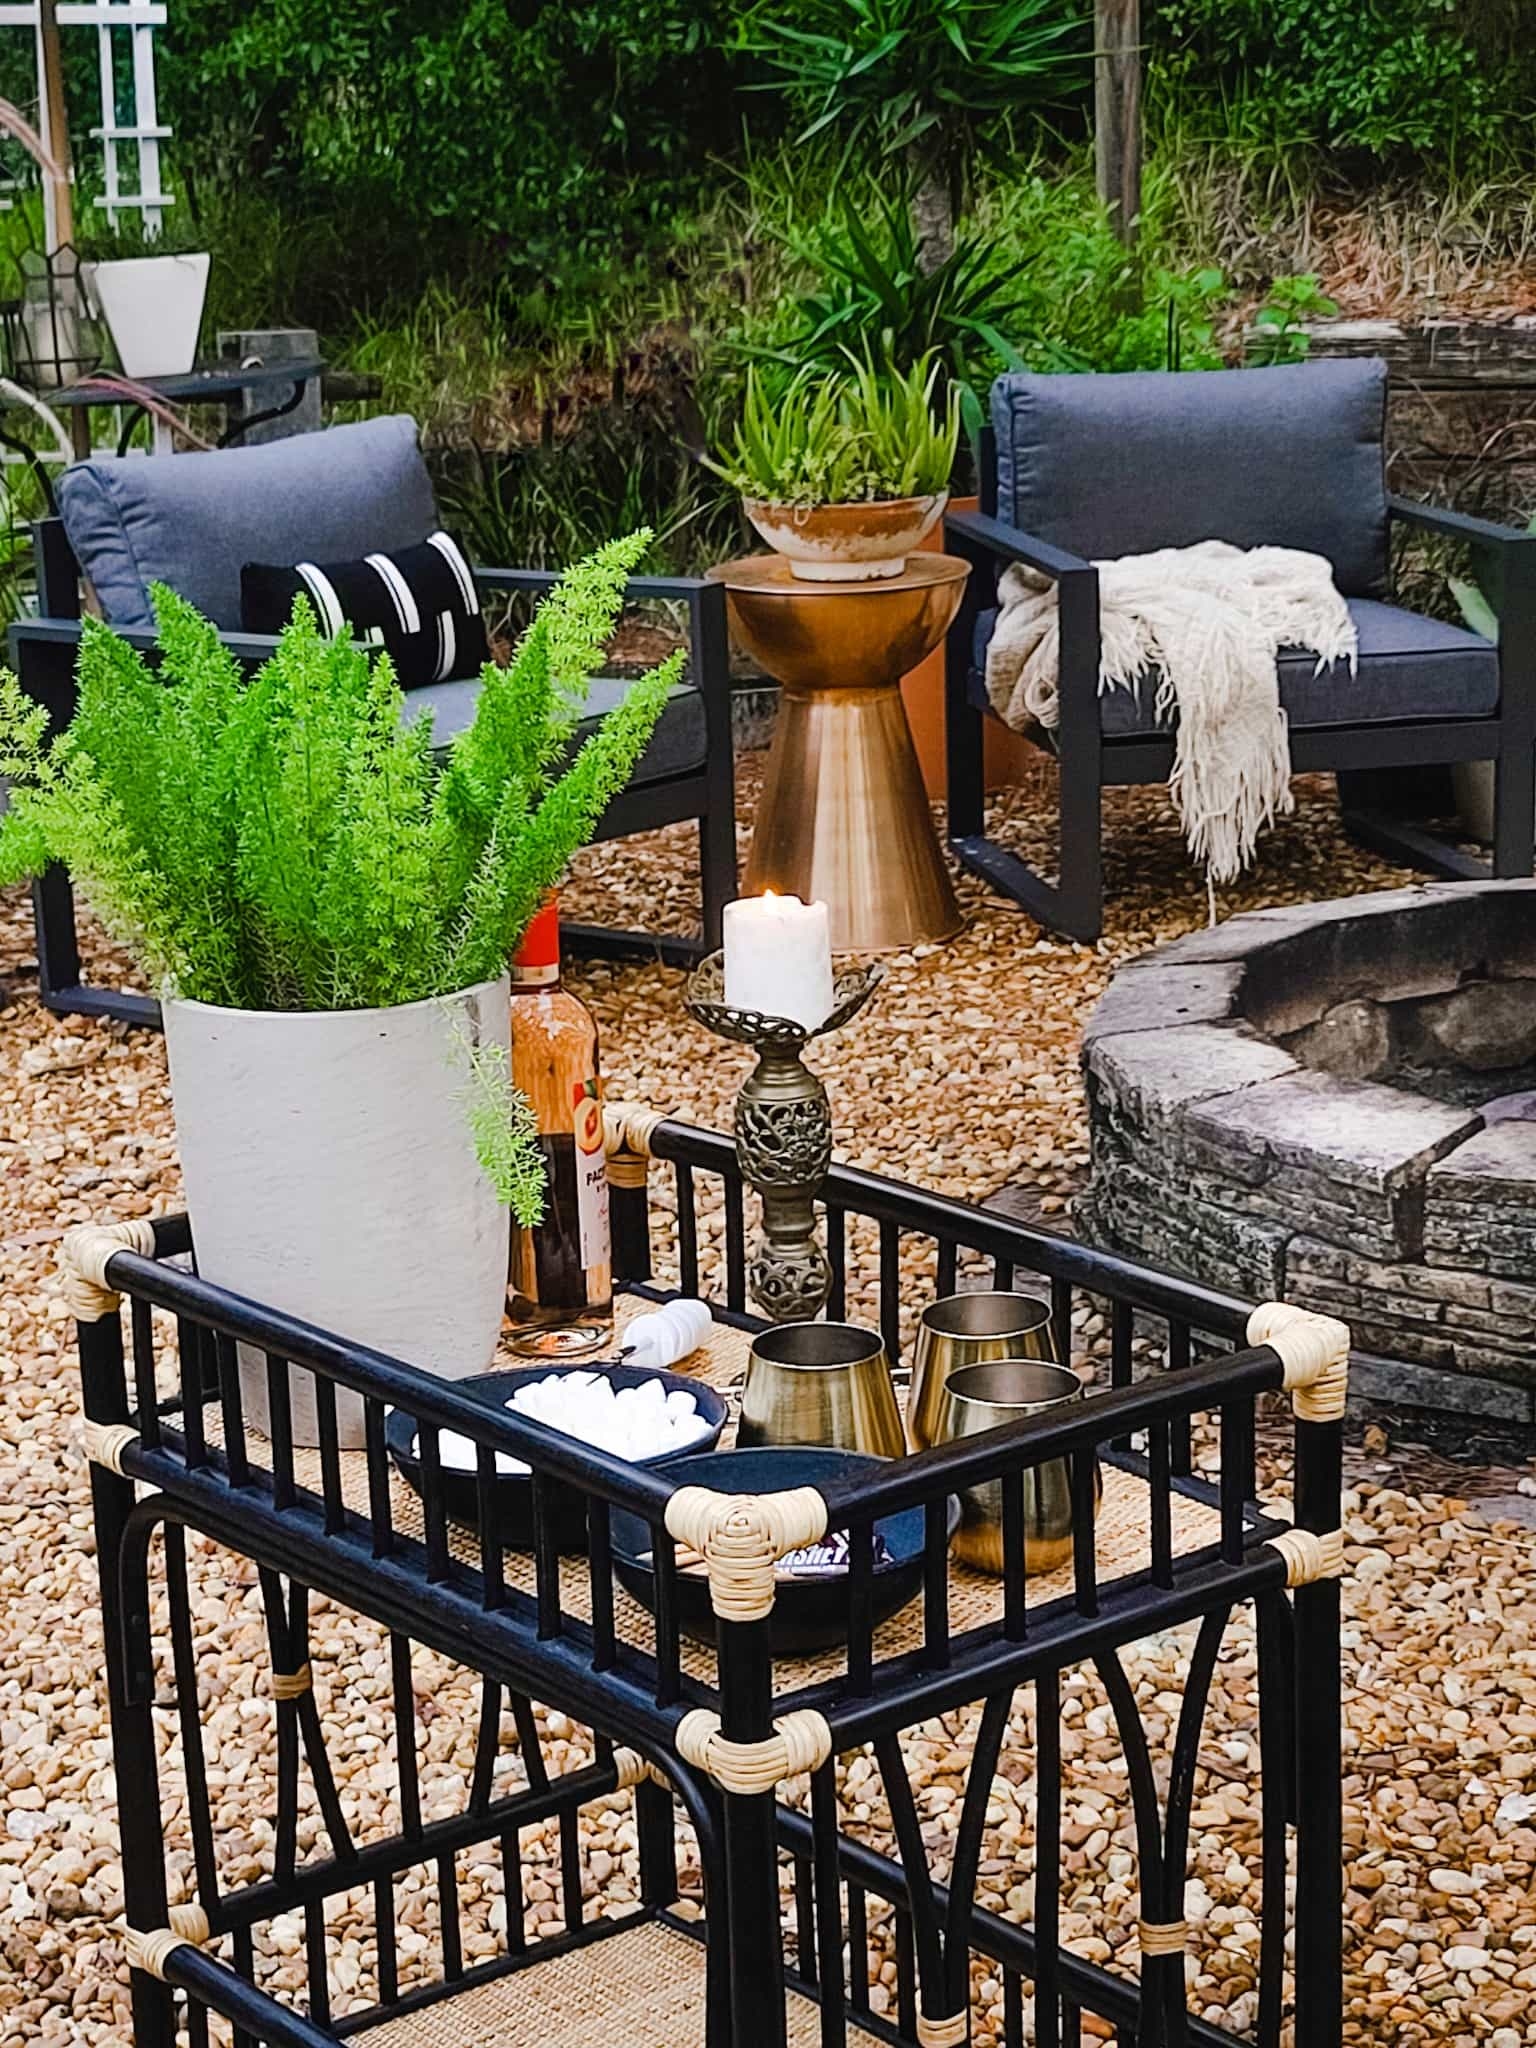 Outdoor living Firepit fireplace gravel patio firelog holder firewood pine tree patio furniture bohemian eclectic rustic farmhouse scandinavian style Countryliving Better Homes and Gardens cozy fall and winter seating entertaining bed bath & beyond 